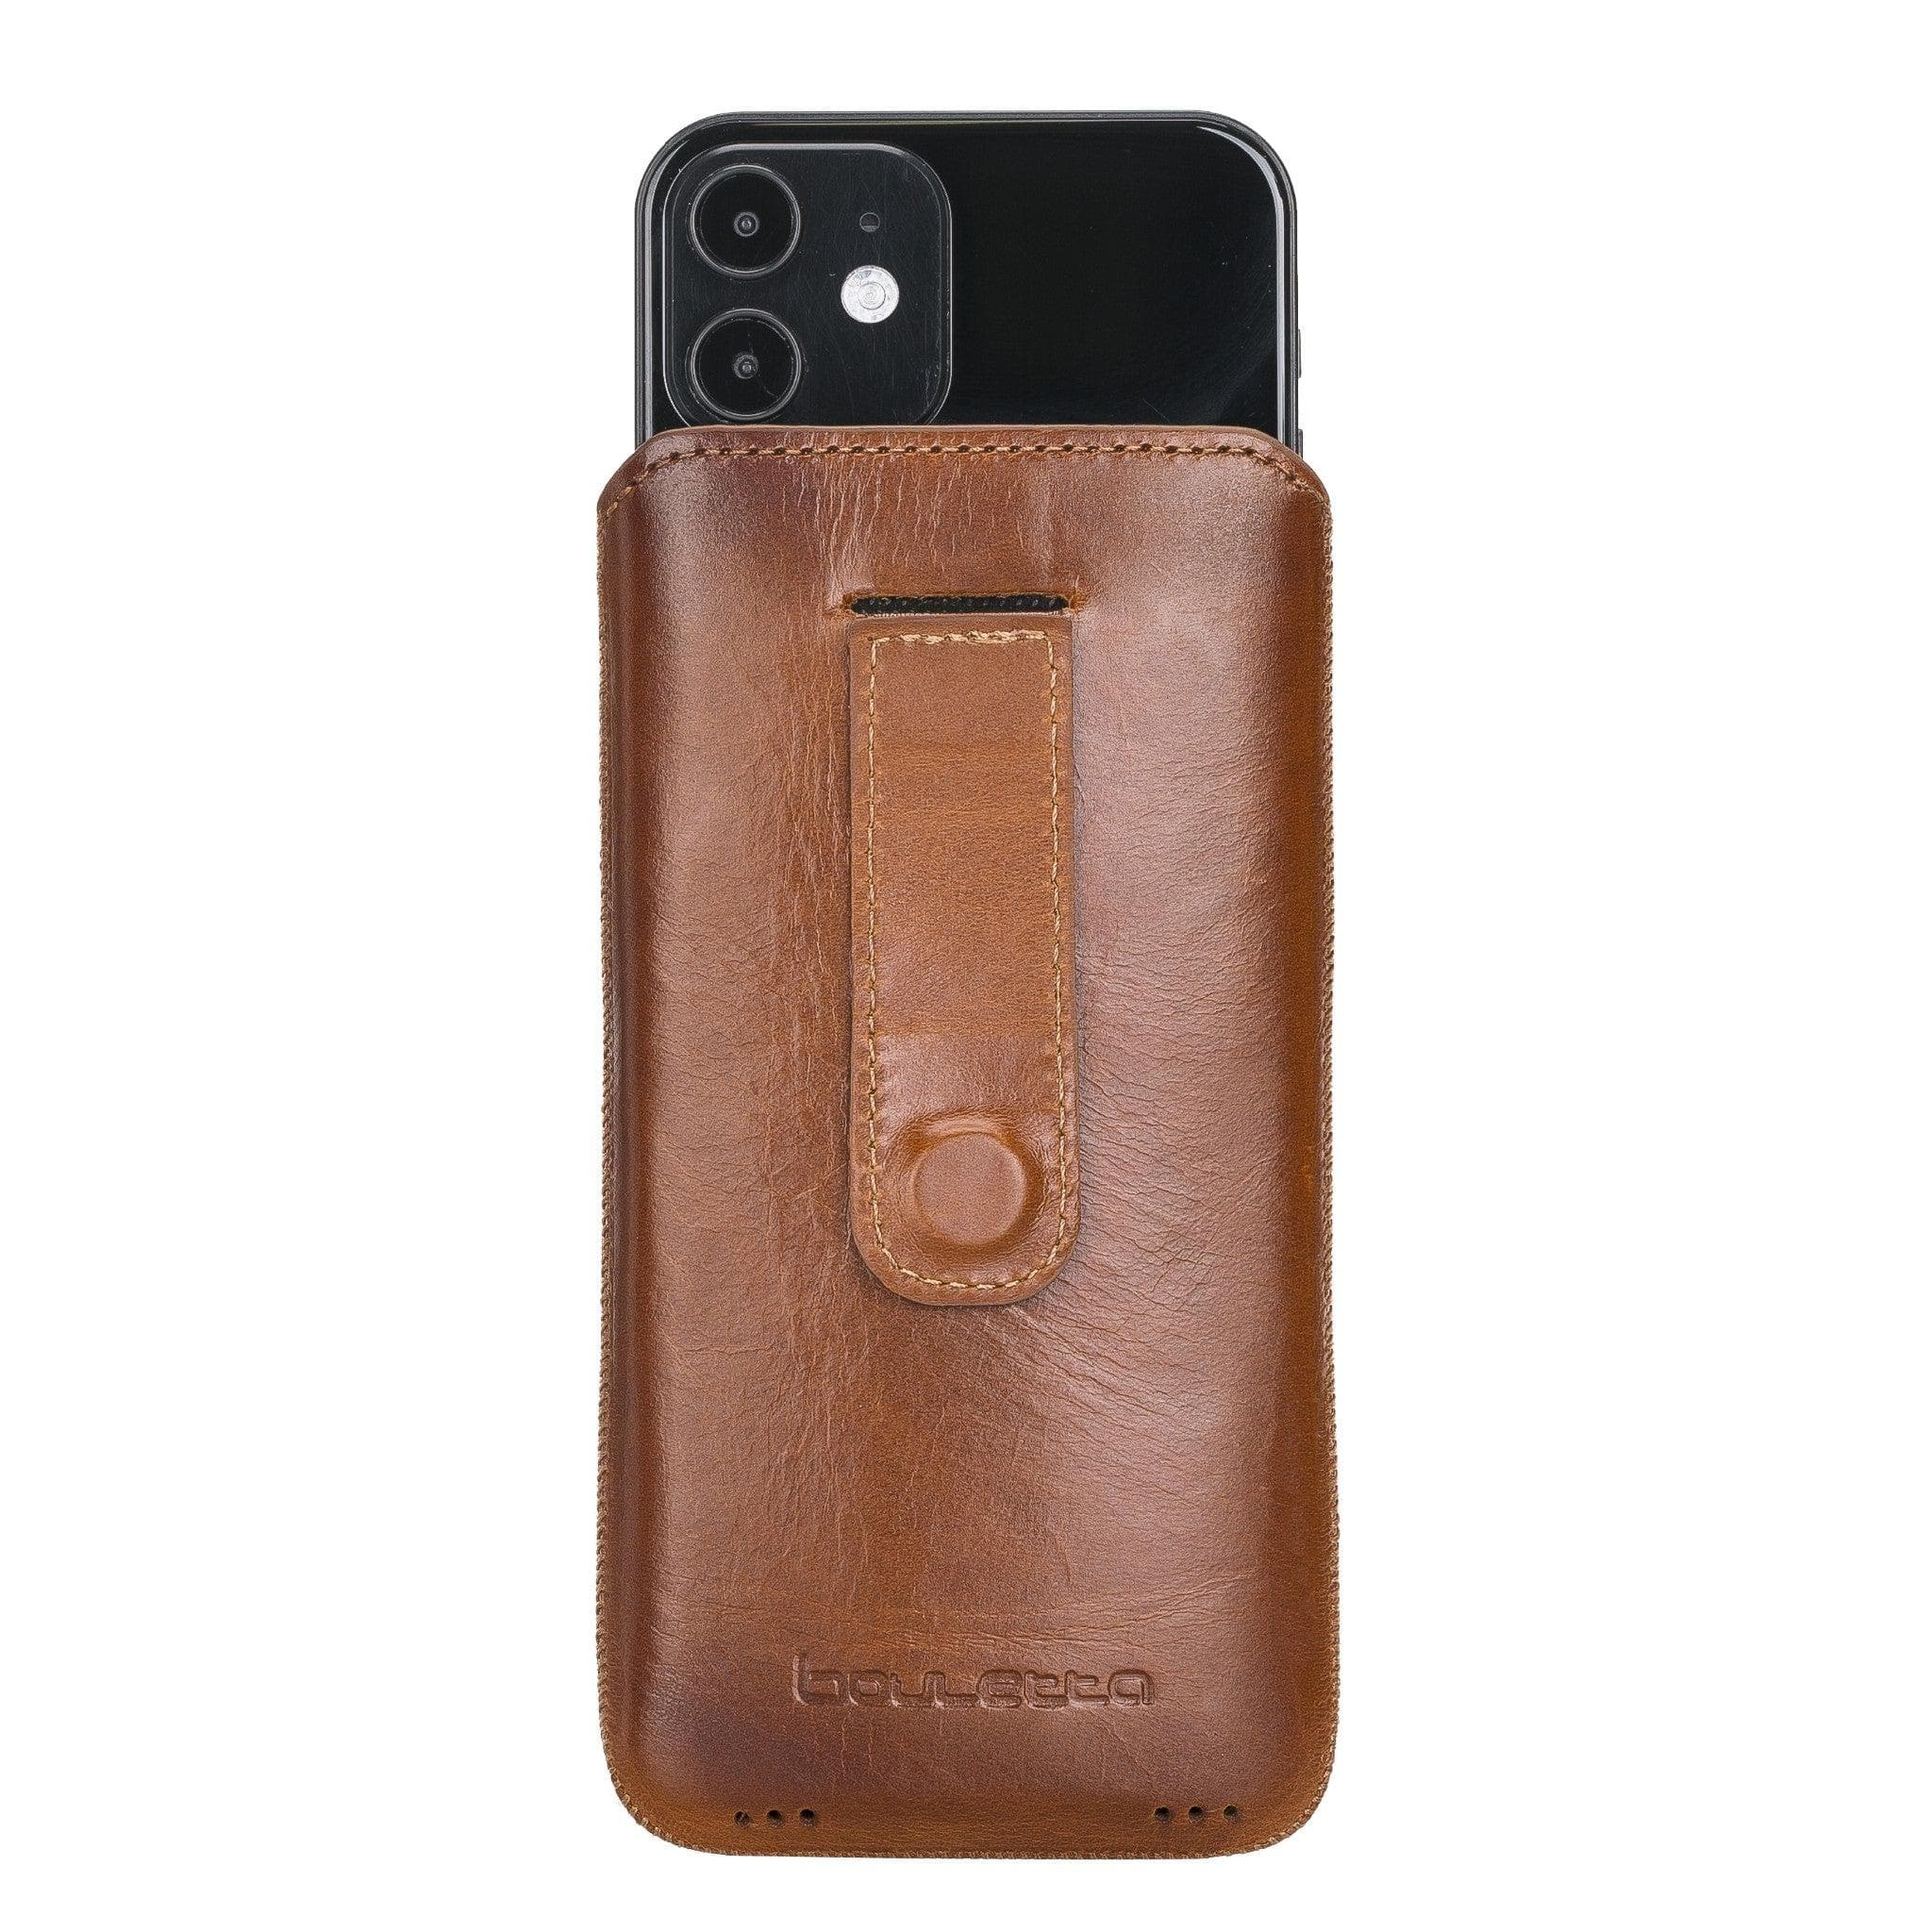 TakeMe Premium Real Leather Soft-Matt TK-RLEBK-A335G-BK, Bags and sleeves  for smartphones